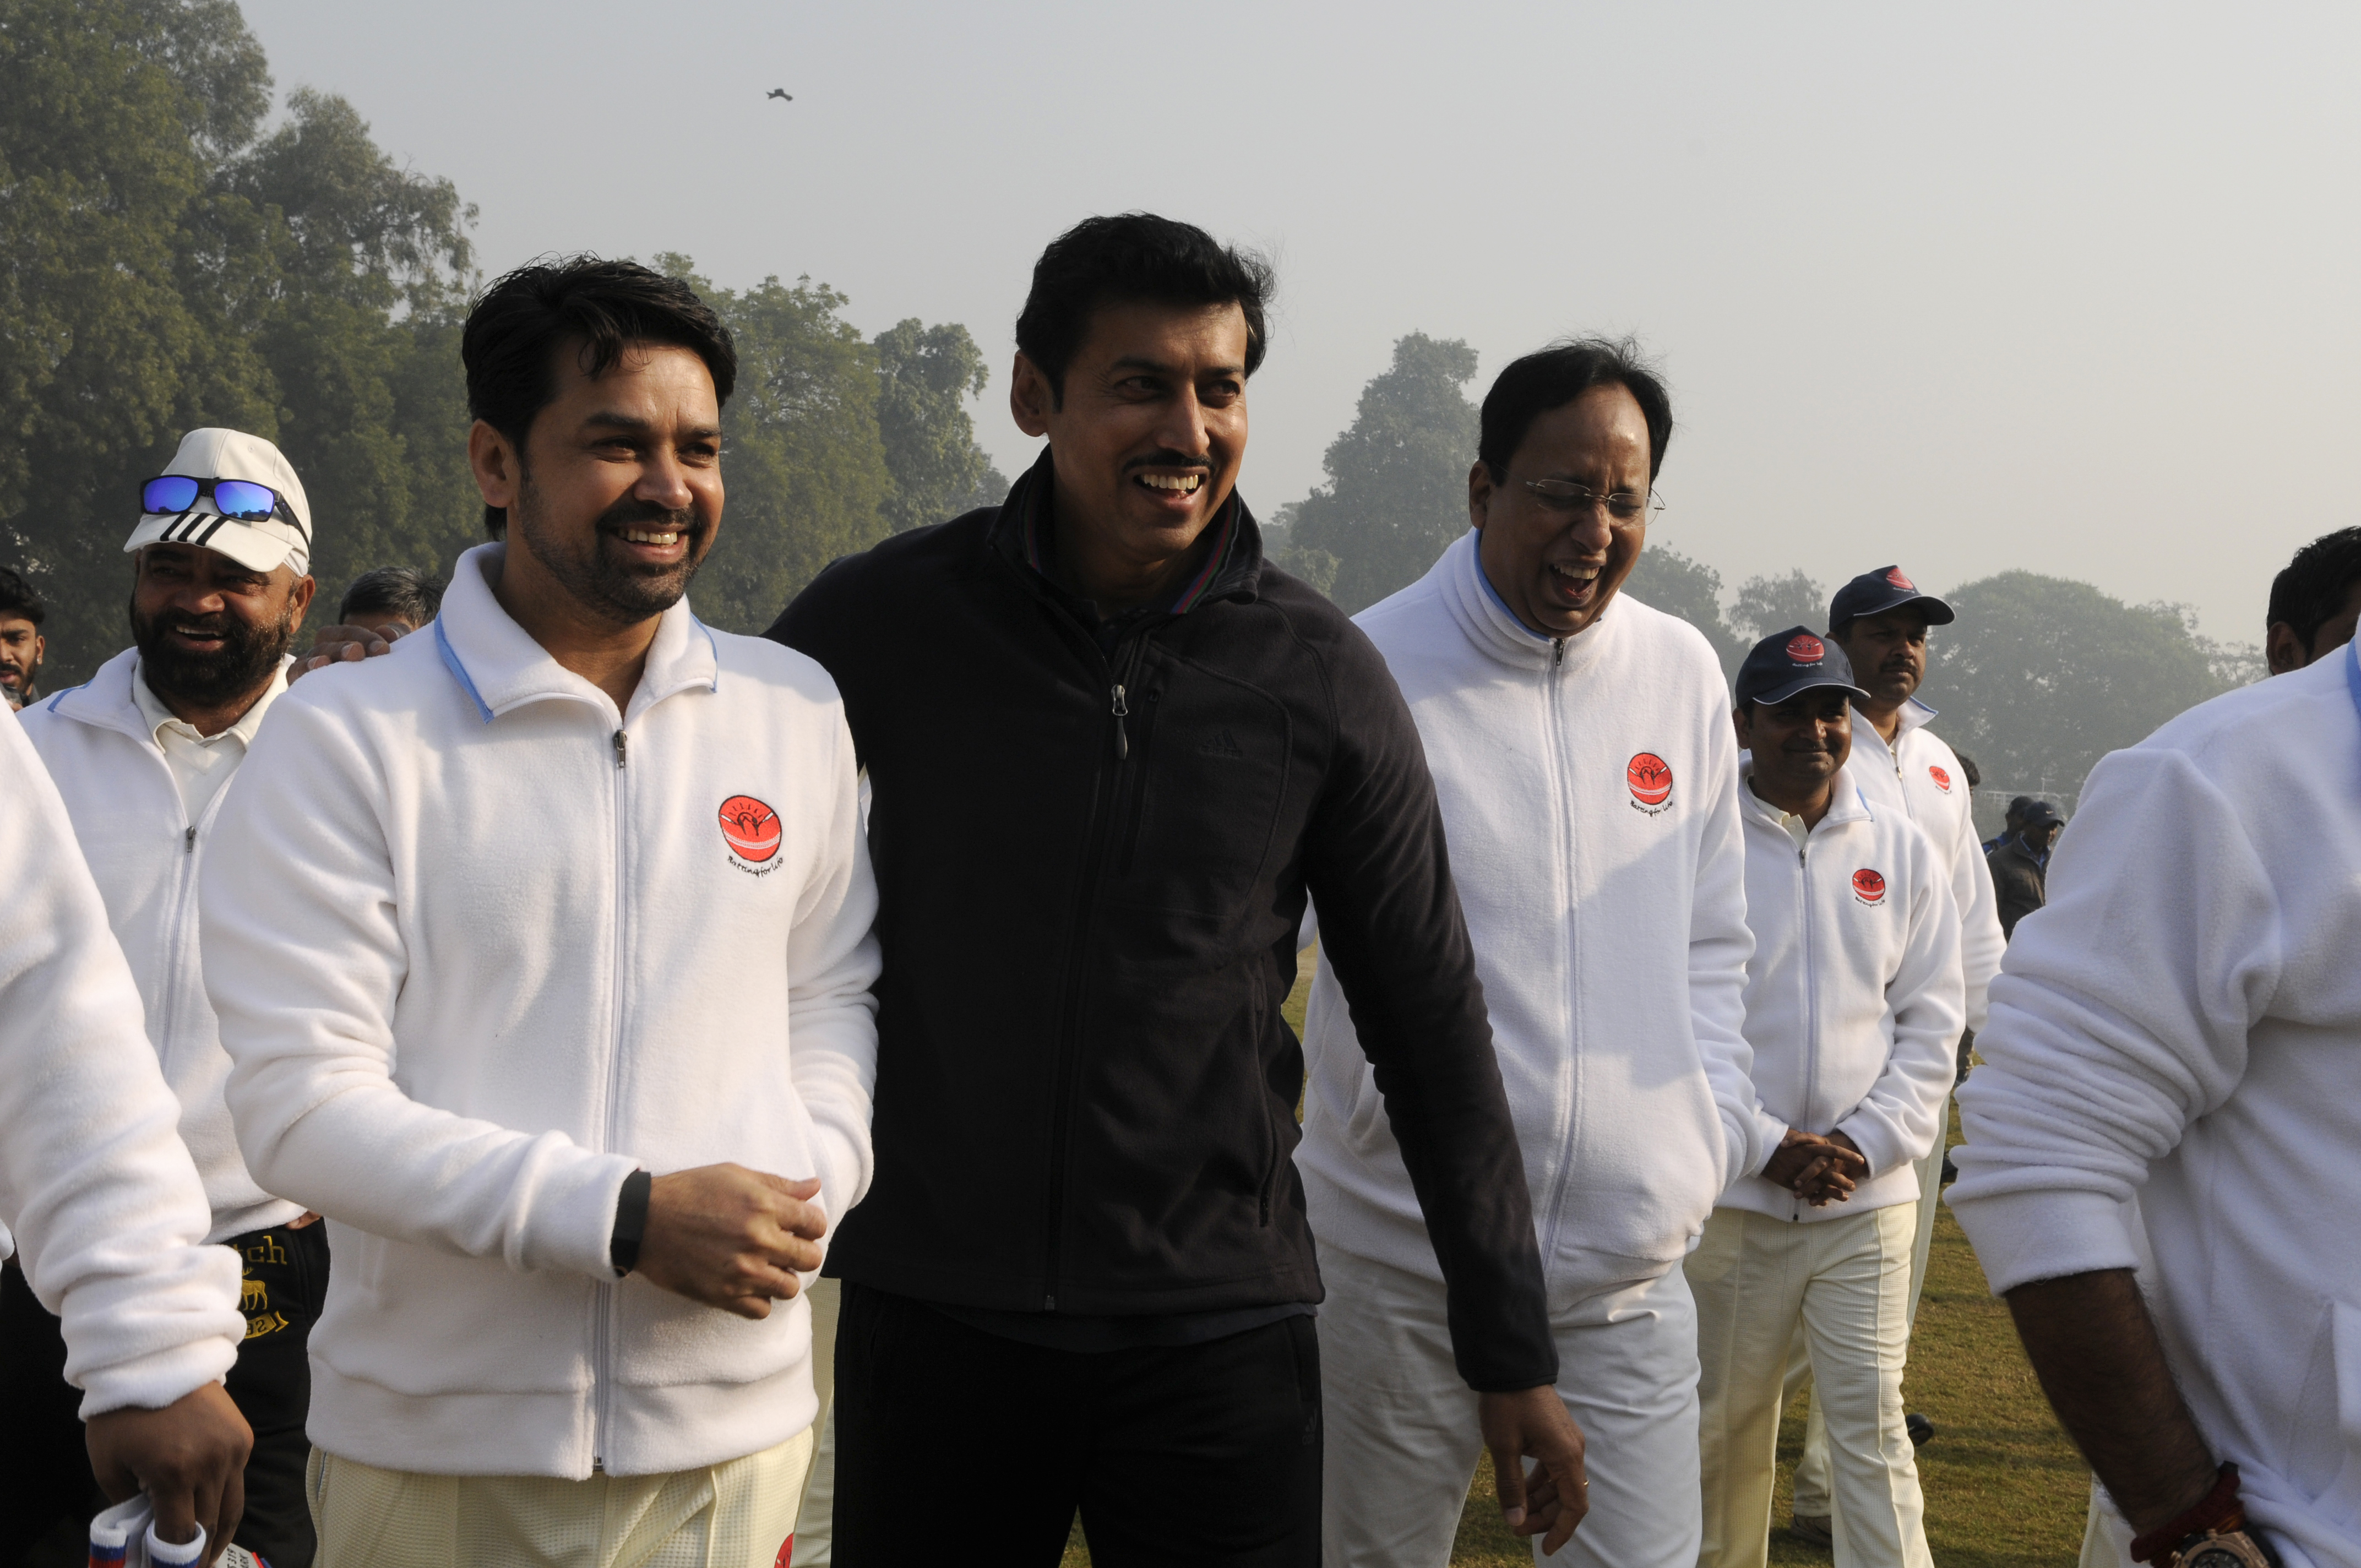 India will play a World Cup if things go like this, says Rajyavardhan Rathore